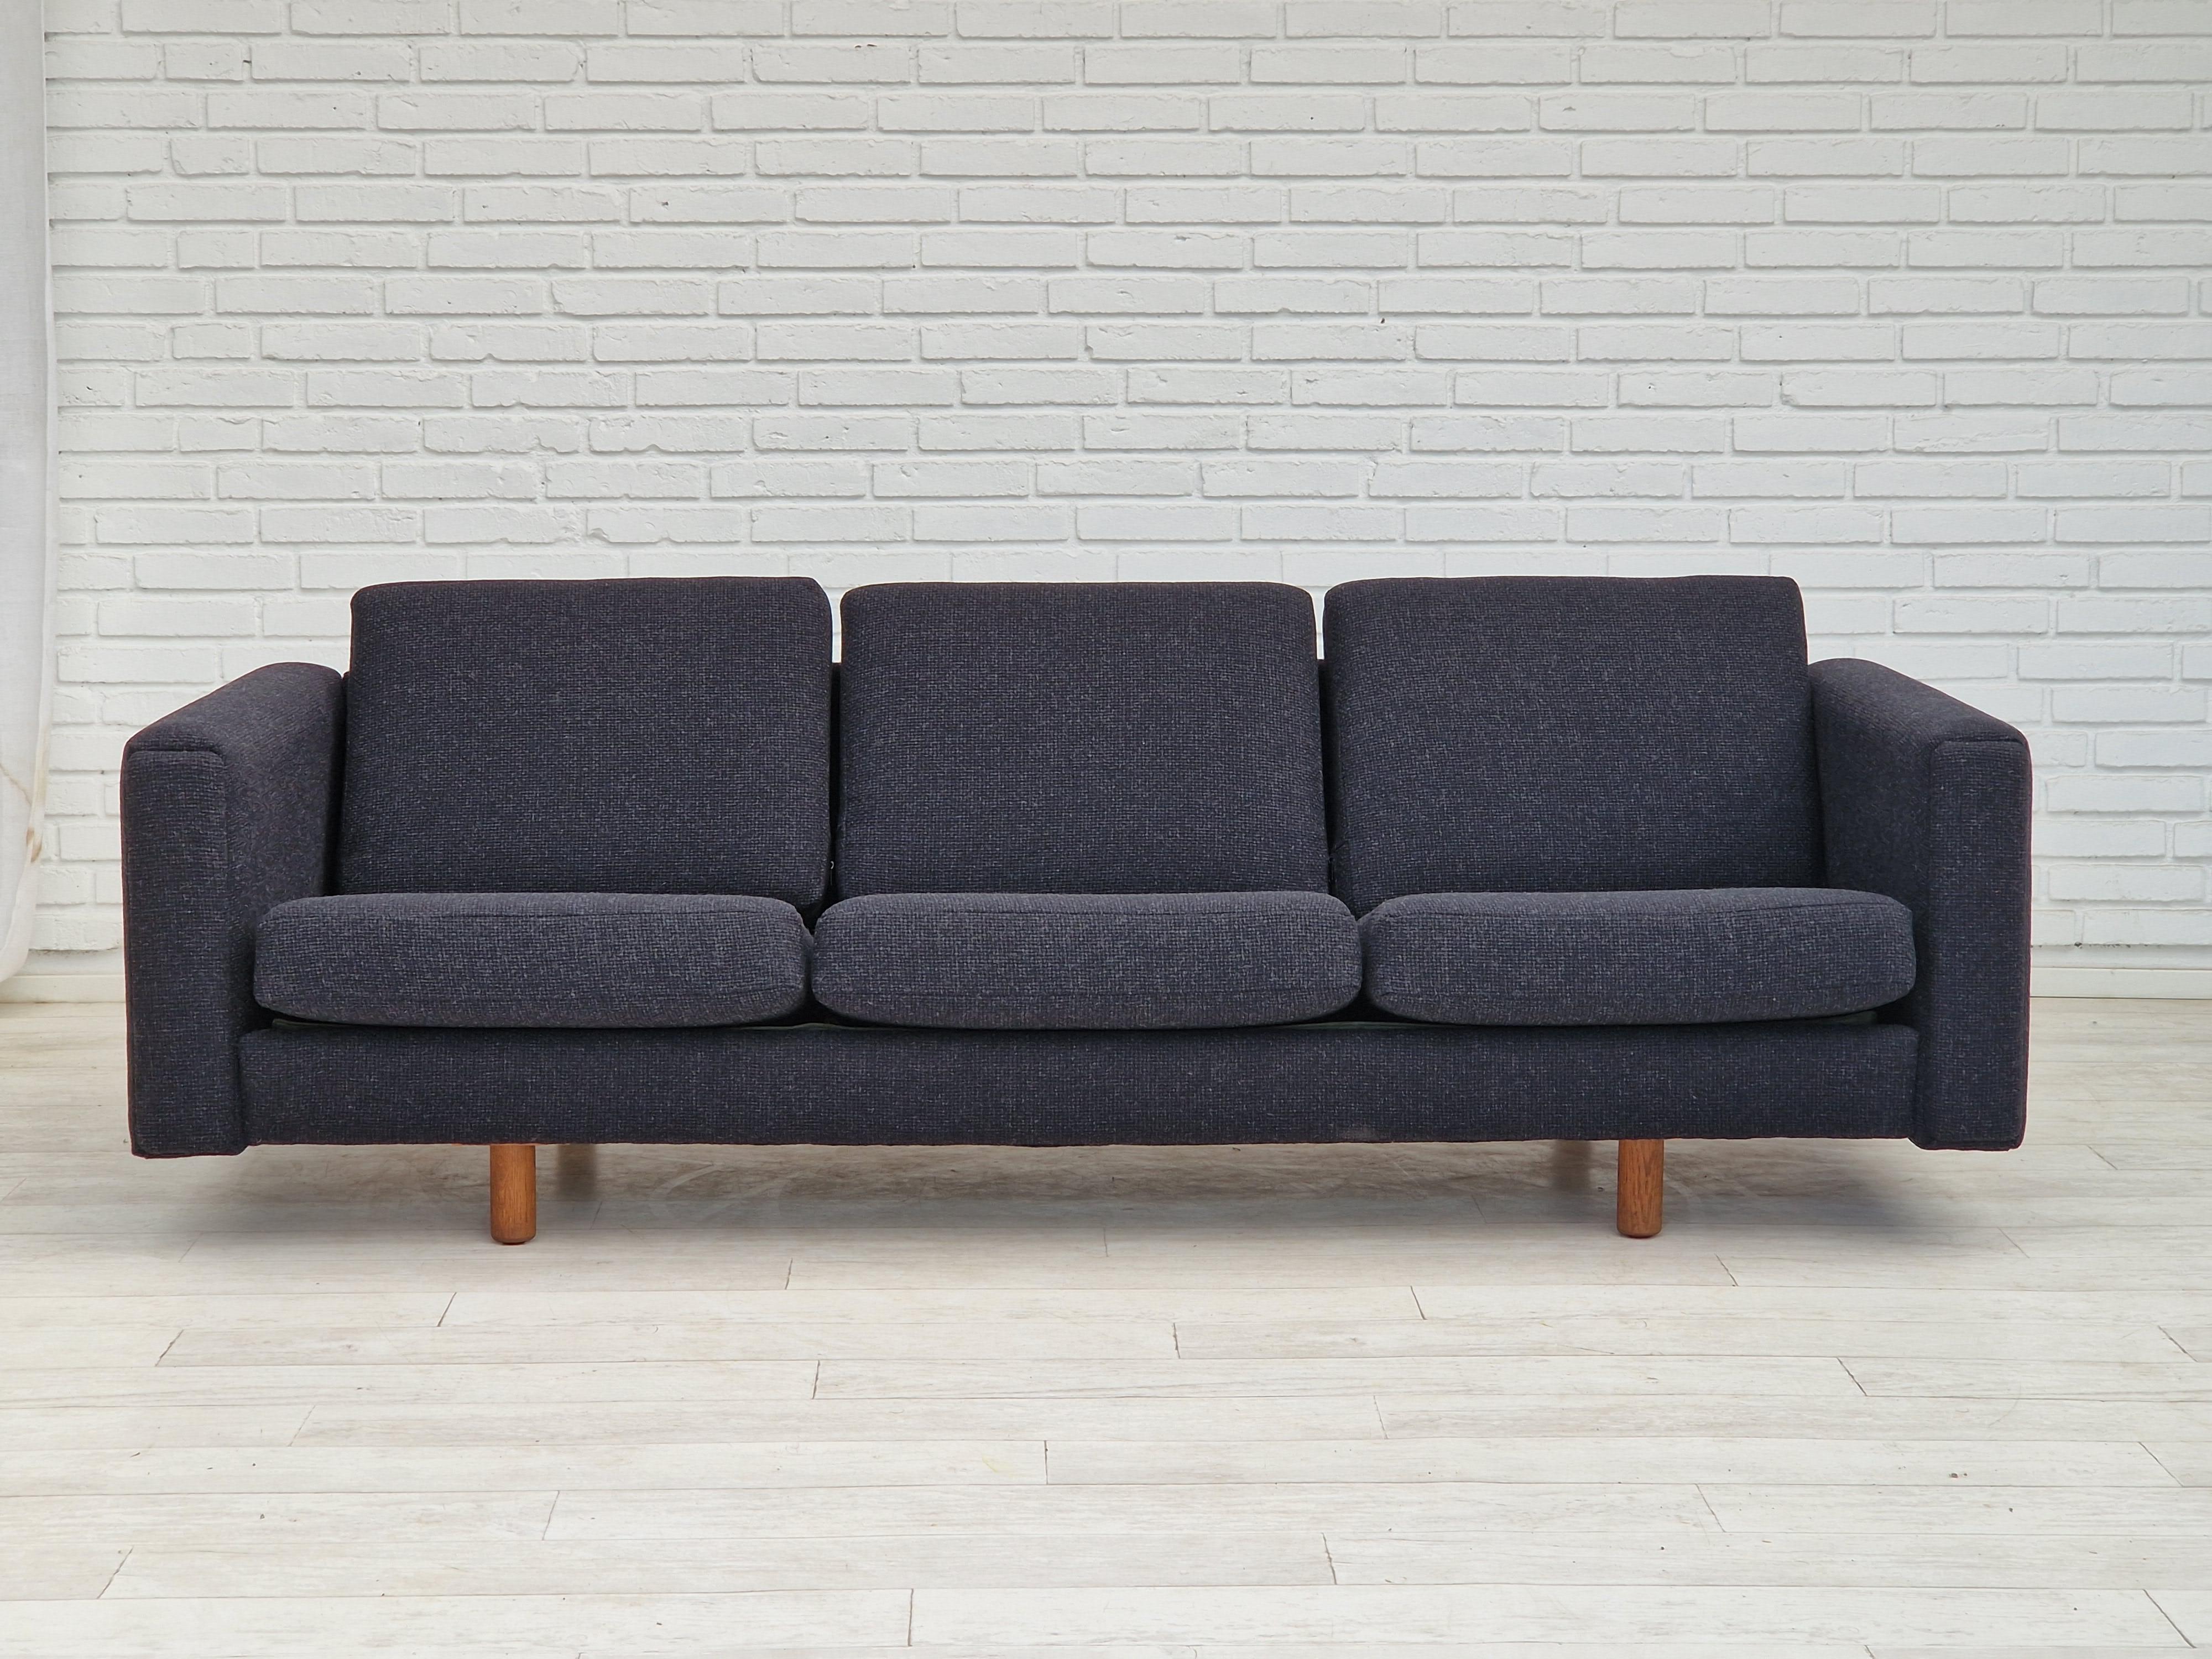 1960s-70s, Danish design by H.J. Wegner. Completely renovated-reupholstered 3 seater sofa model GE300. Quality furniture wool fabric Glasgow in charcoal grey. Brand new upholstery and cushions. Oak legs. Manufactured by Danish furniture manufacturer